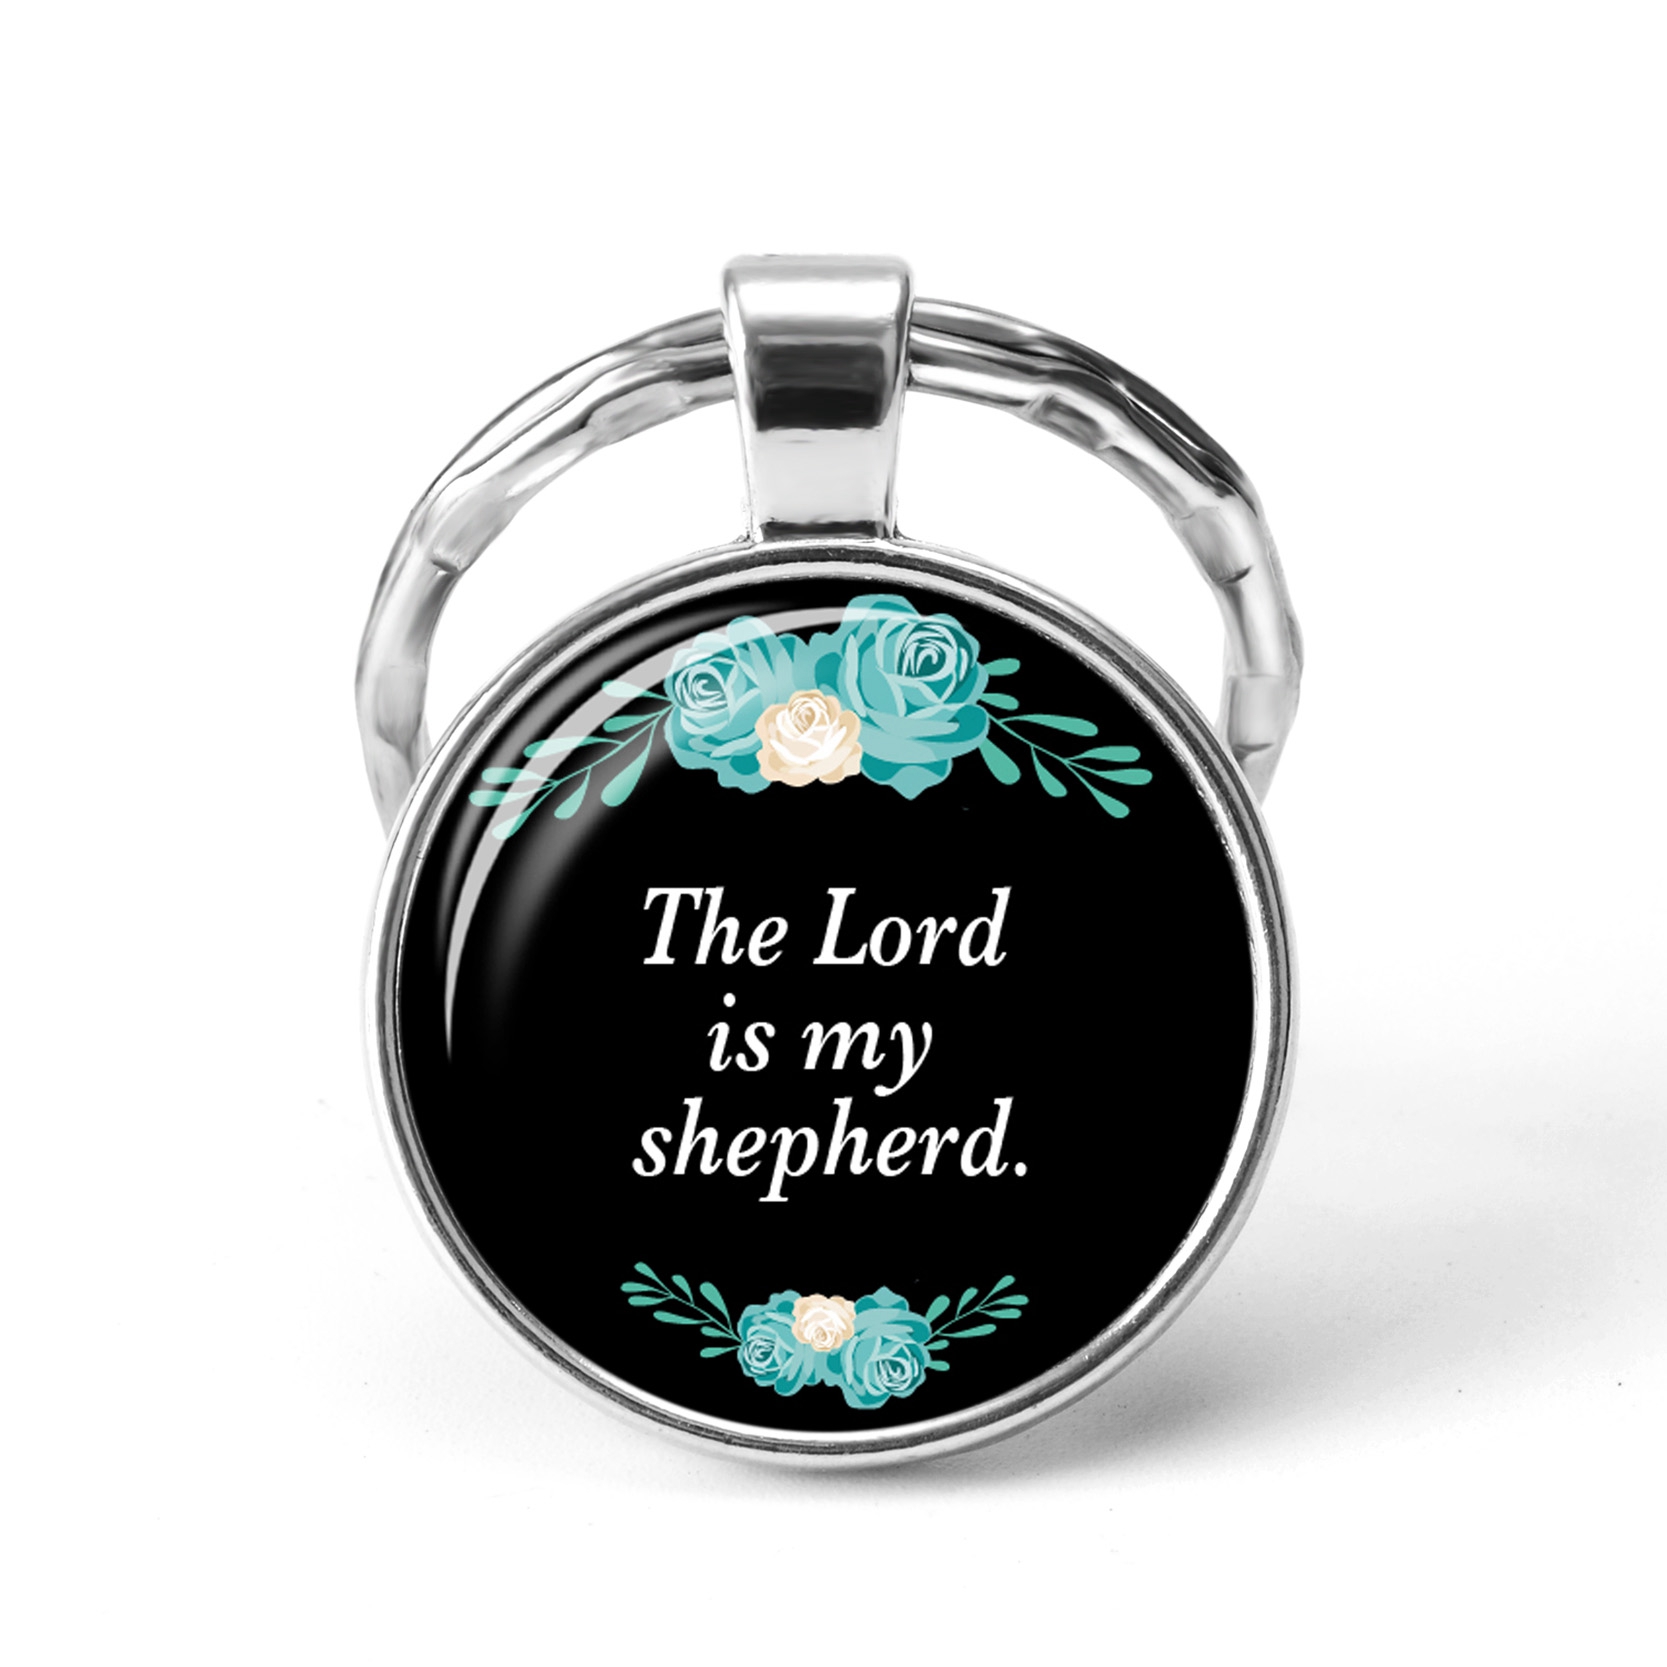 2019 Newest Metal Key Chains The Lord Is My Shepherd Quote Scripture Bible Verse Pendant Glass Cabochon Key Chain Key Ring